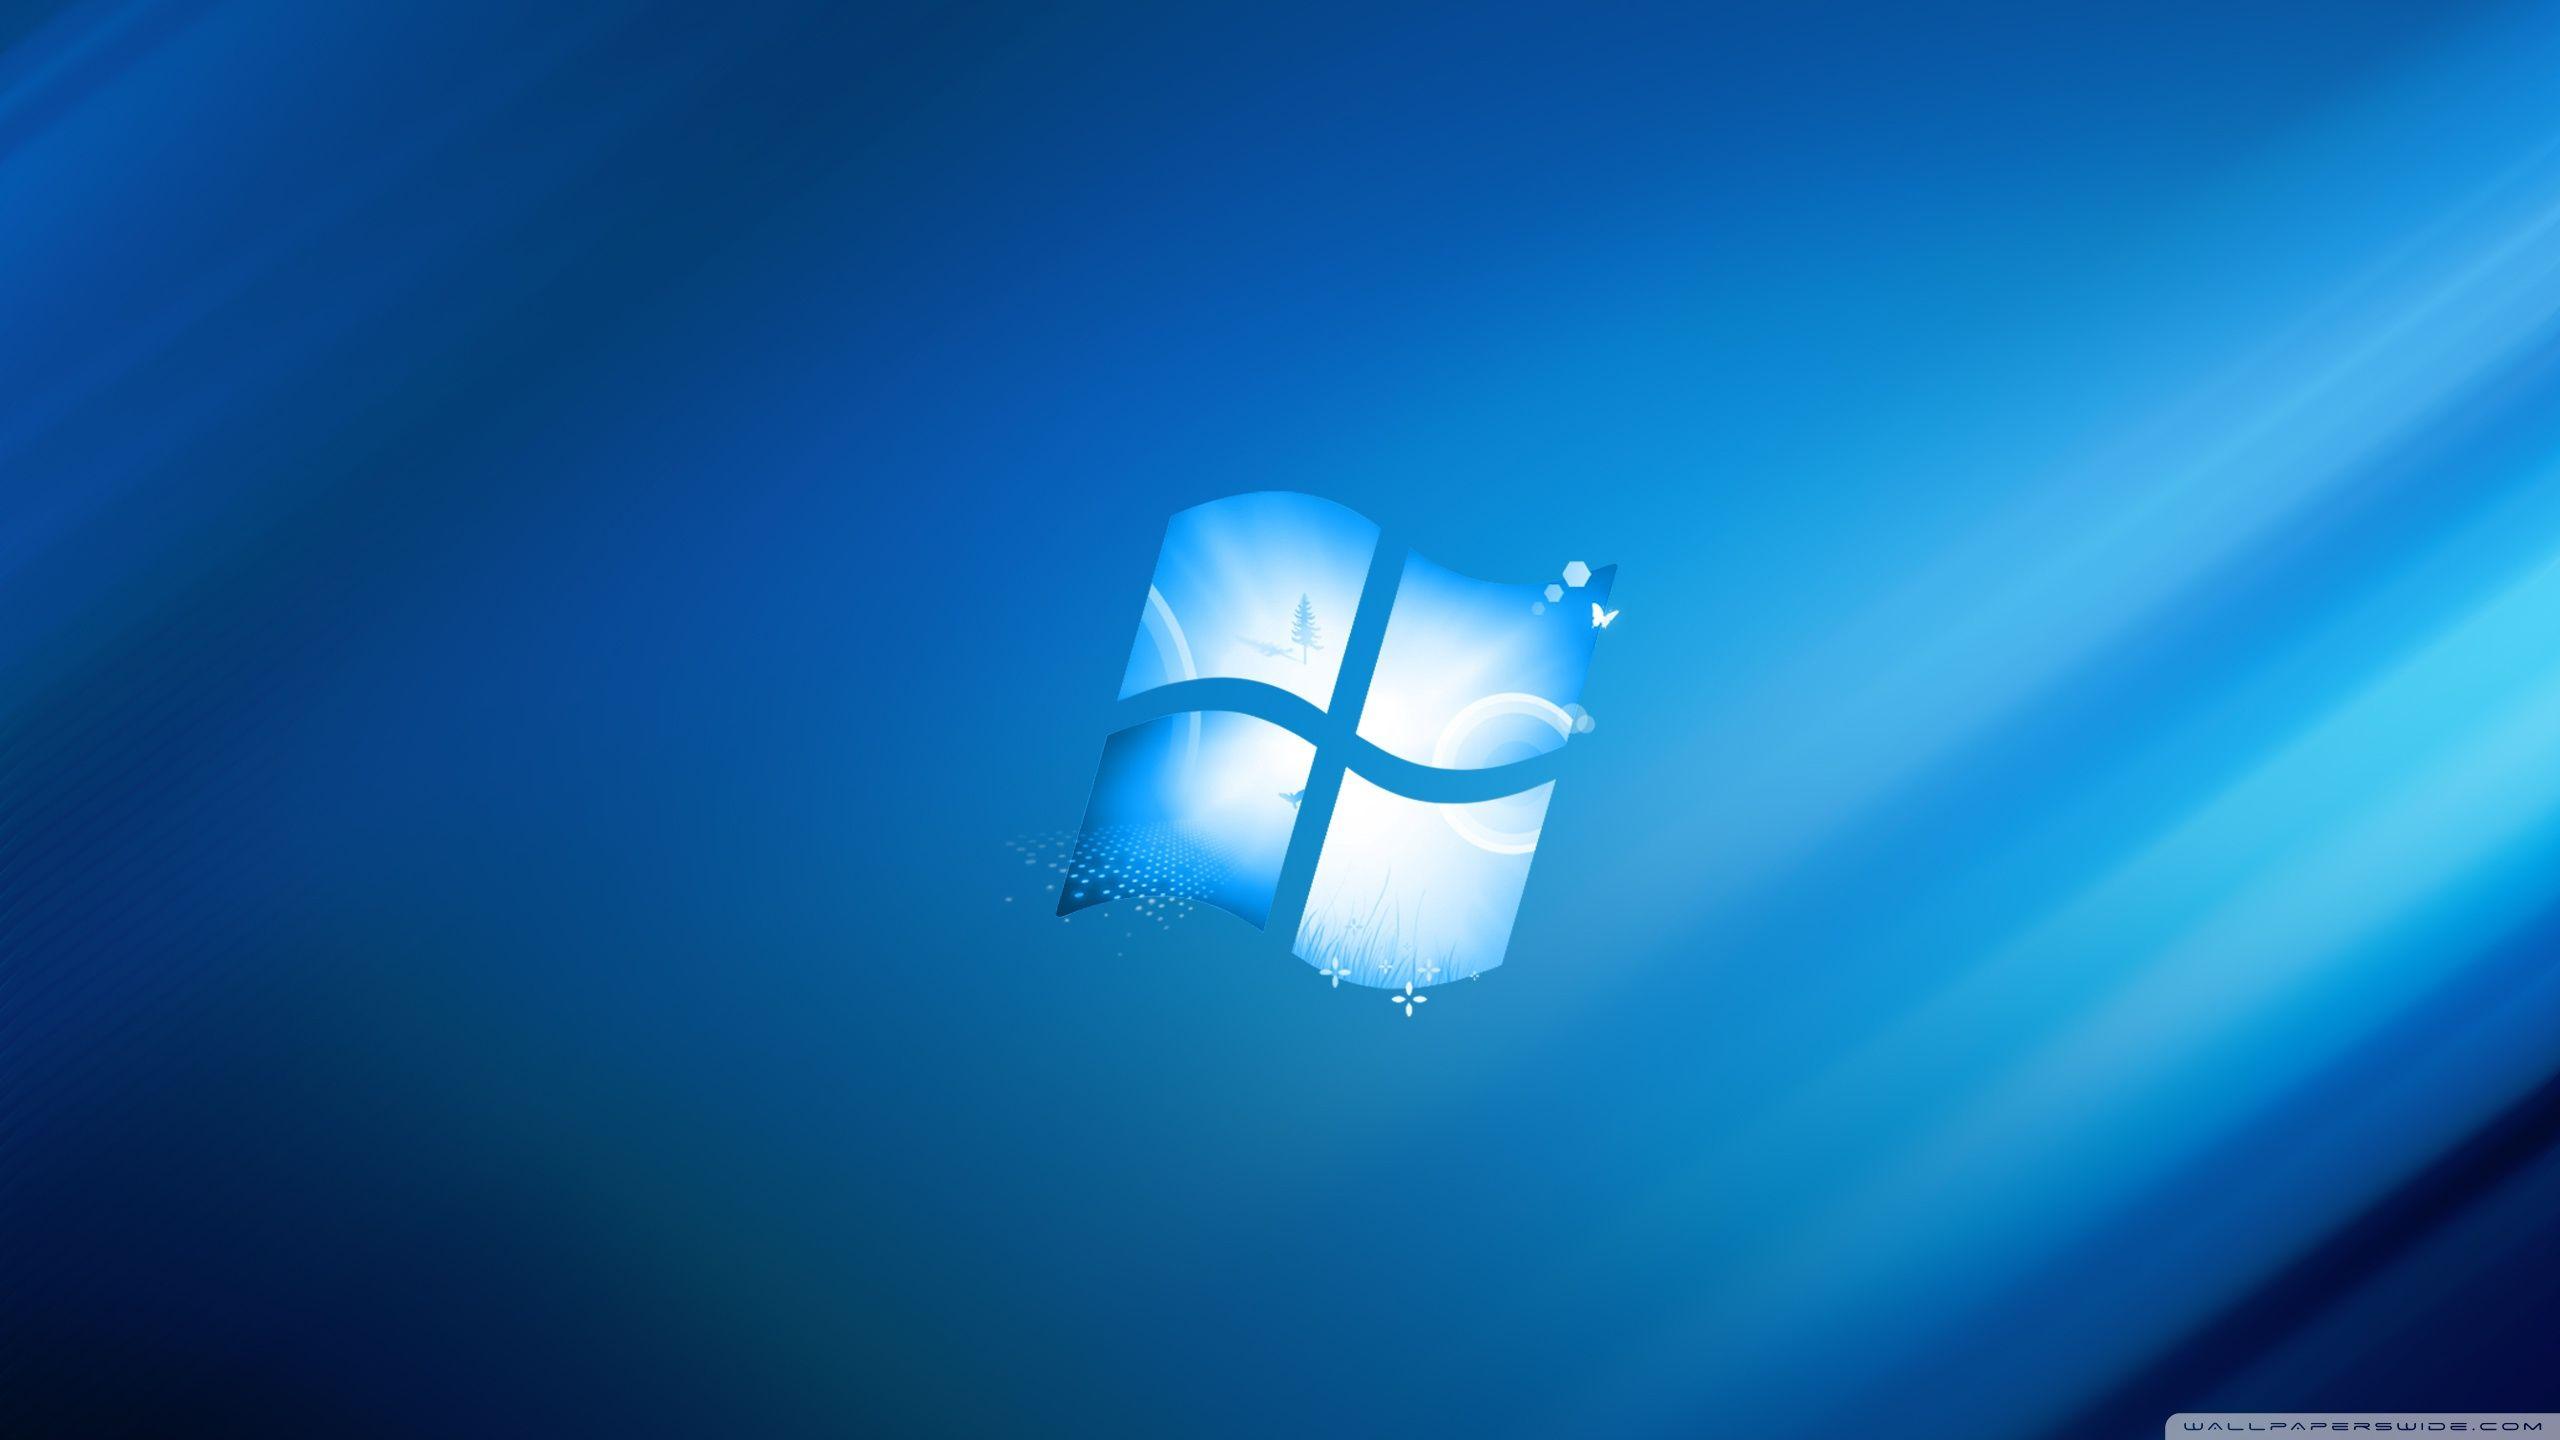 Windows Themes Wallpapers Wallpaper Cave